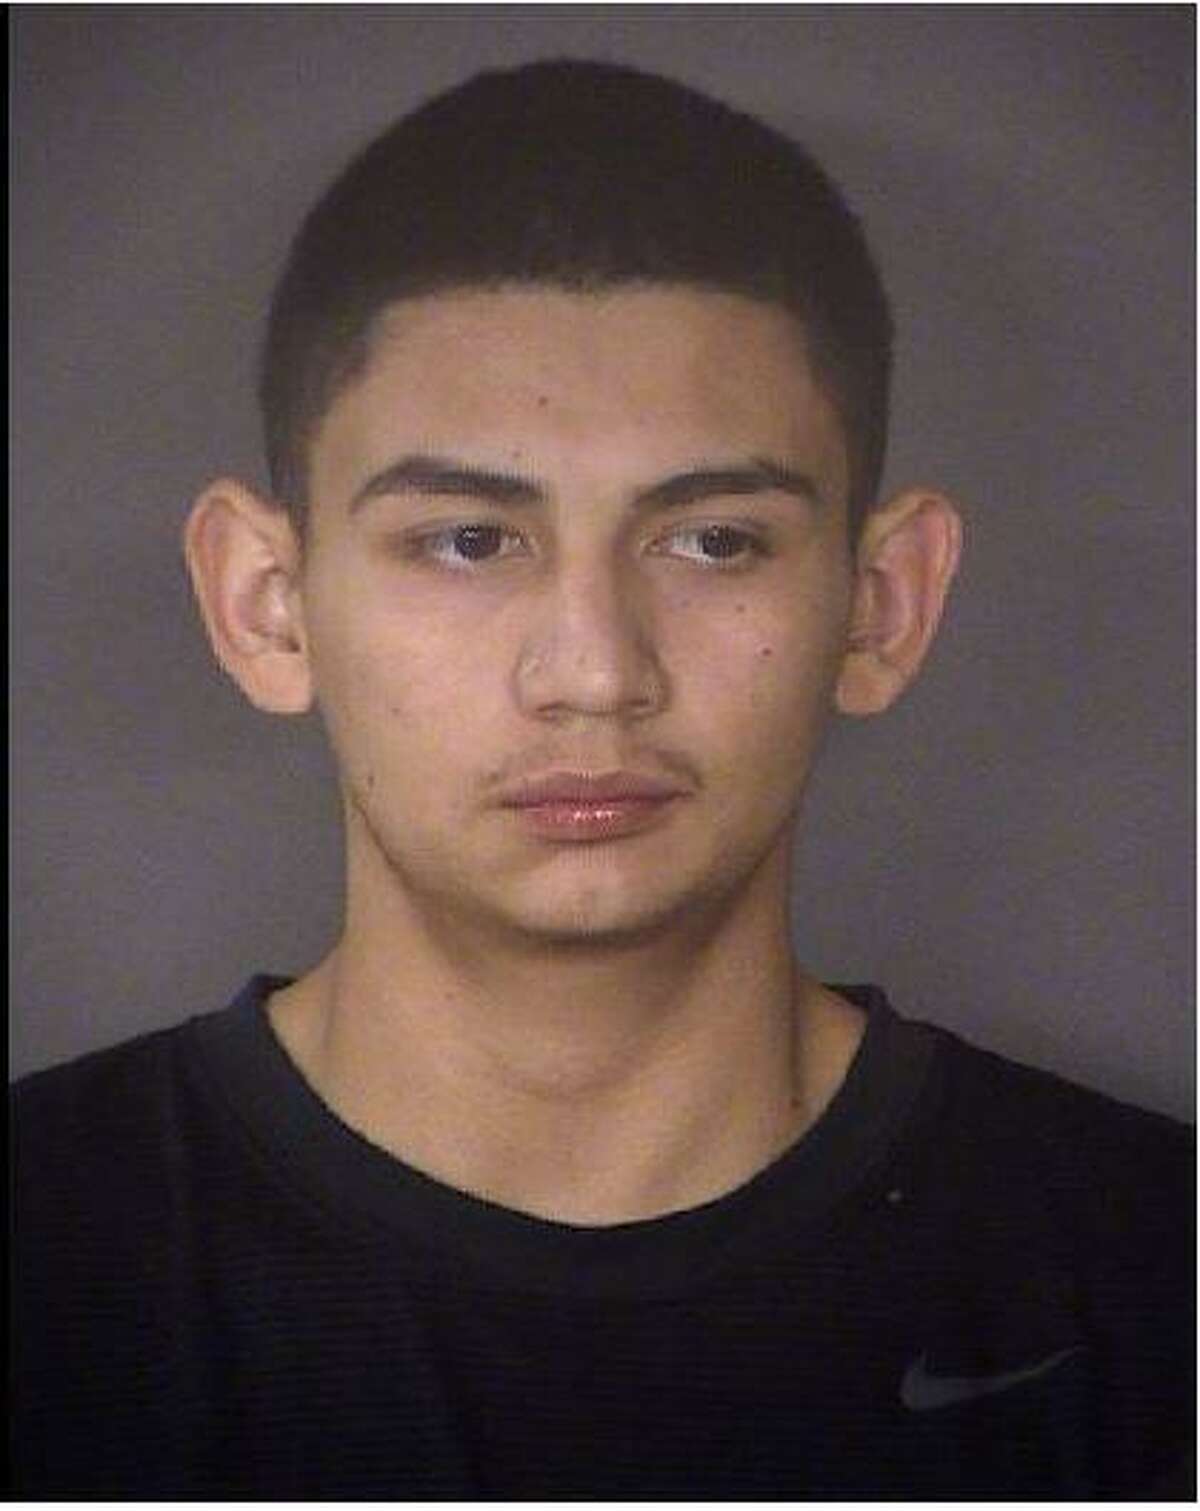 Joseph Edward Hernandez, 19, is accused of fatally shooting a man Wednesday night at a home on the far North Side.